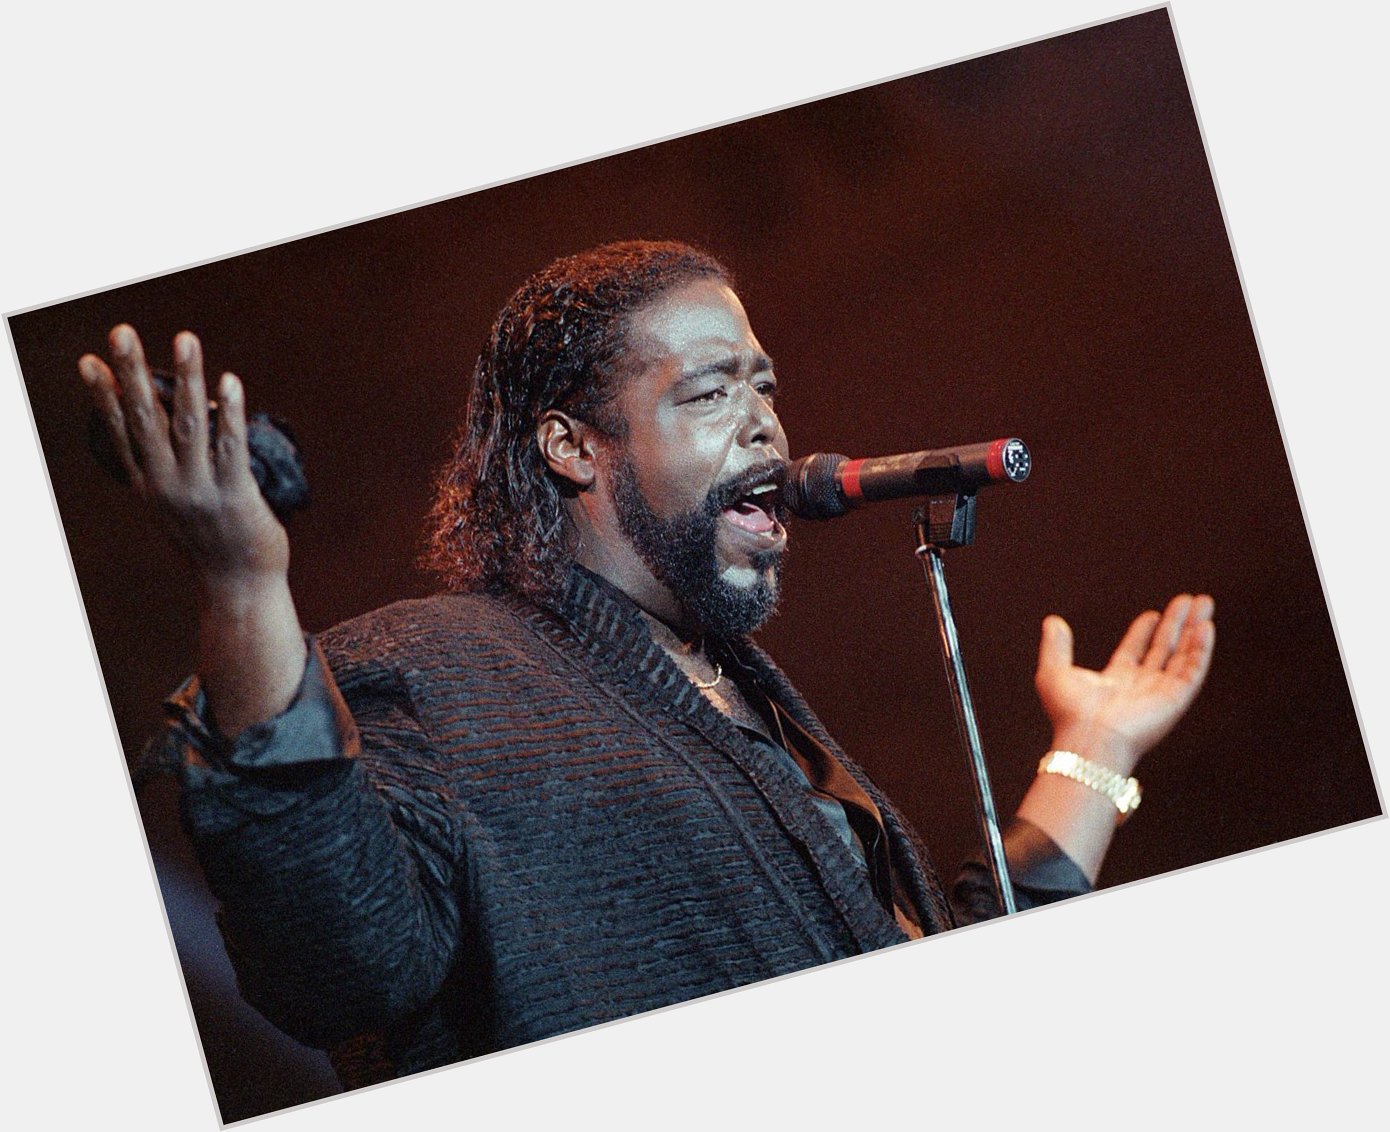 Happy Birthday Barry White - Find out more in today\s music history -  